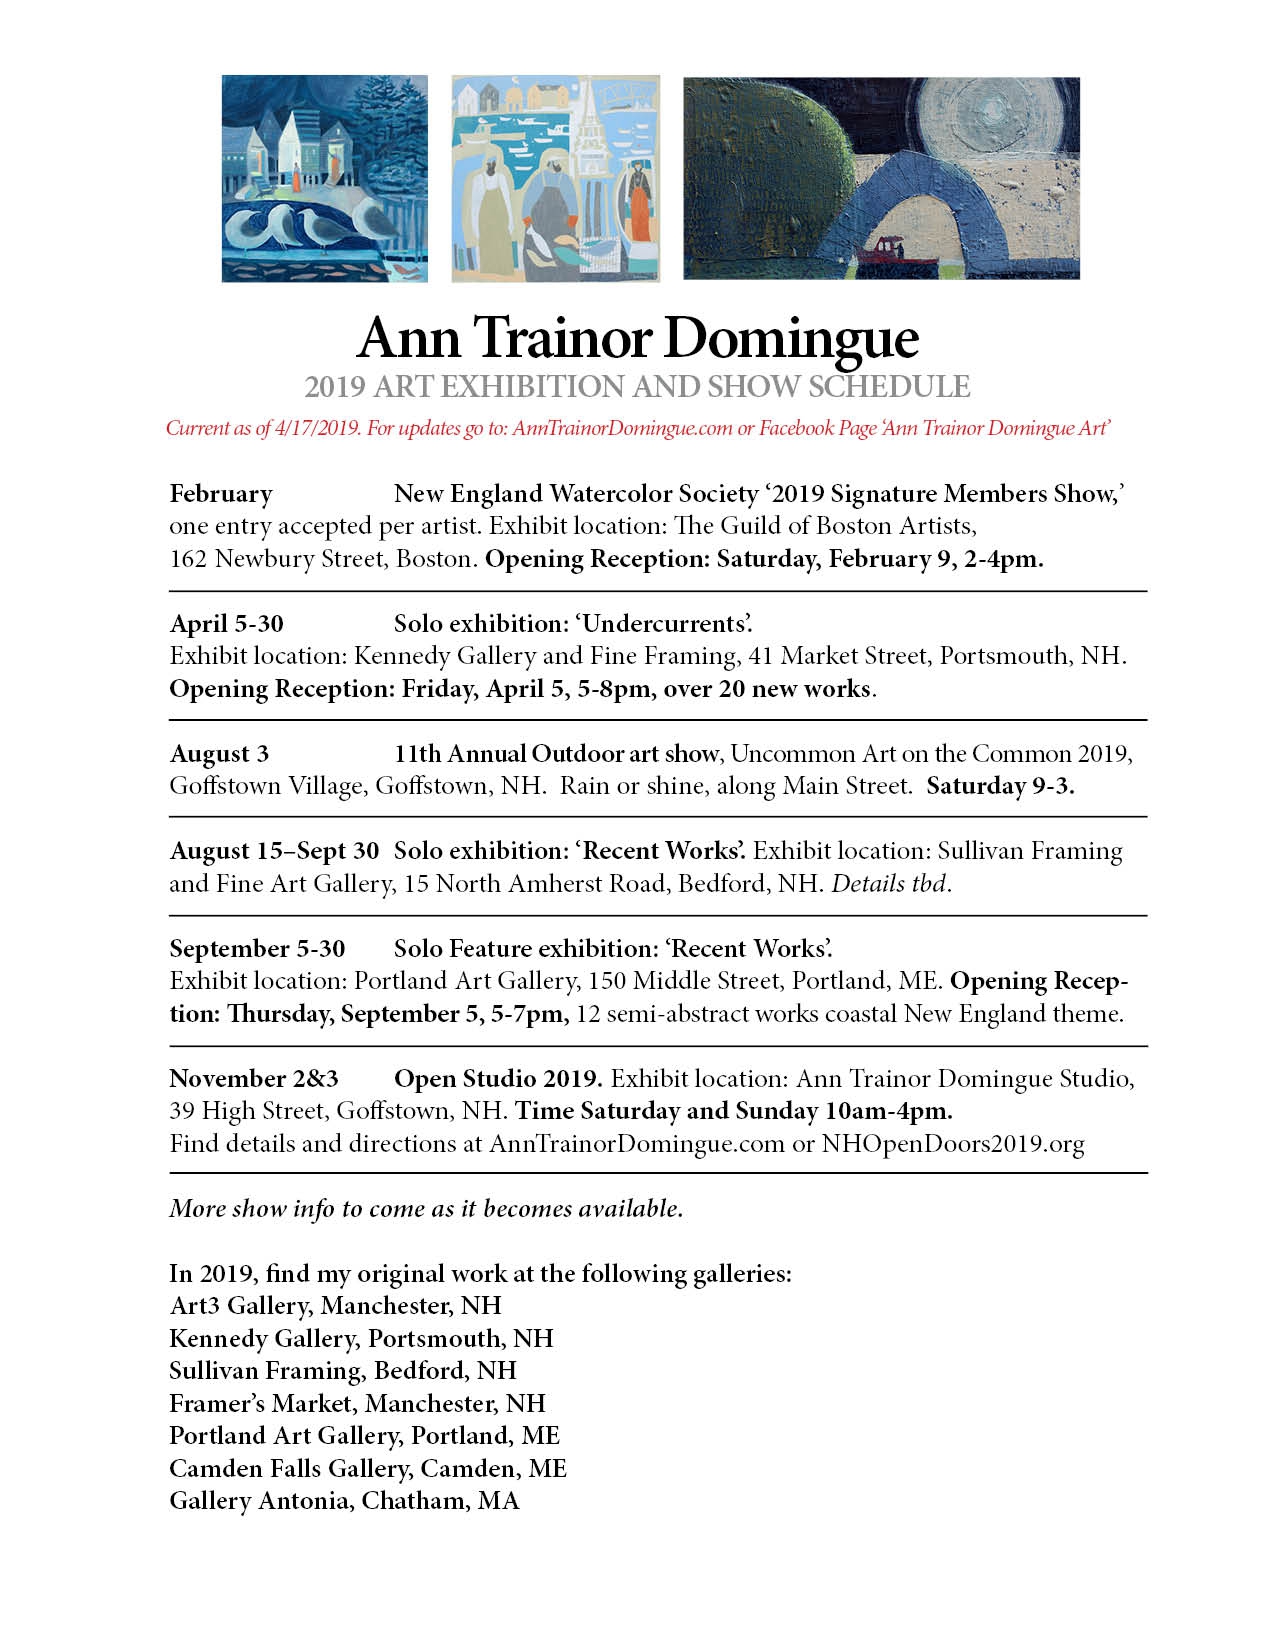 Click here to view 2019 Exhibition Schedule by Ann Trainor Domingue